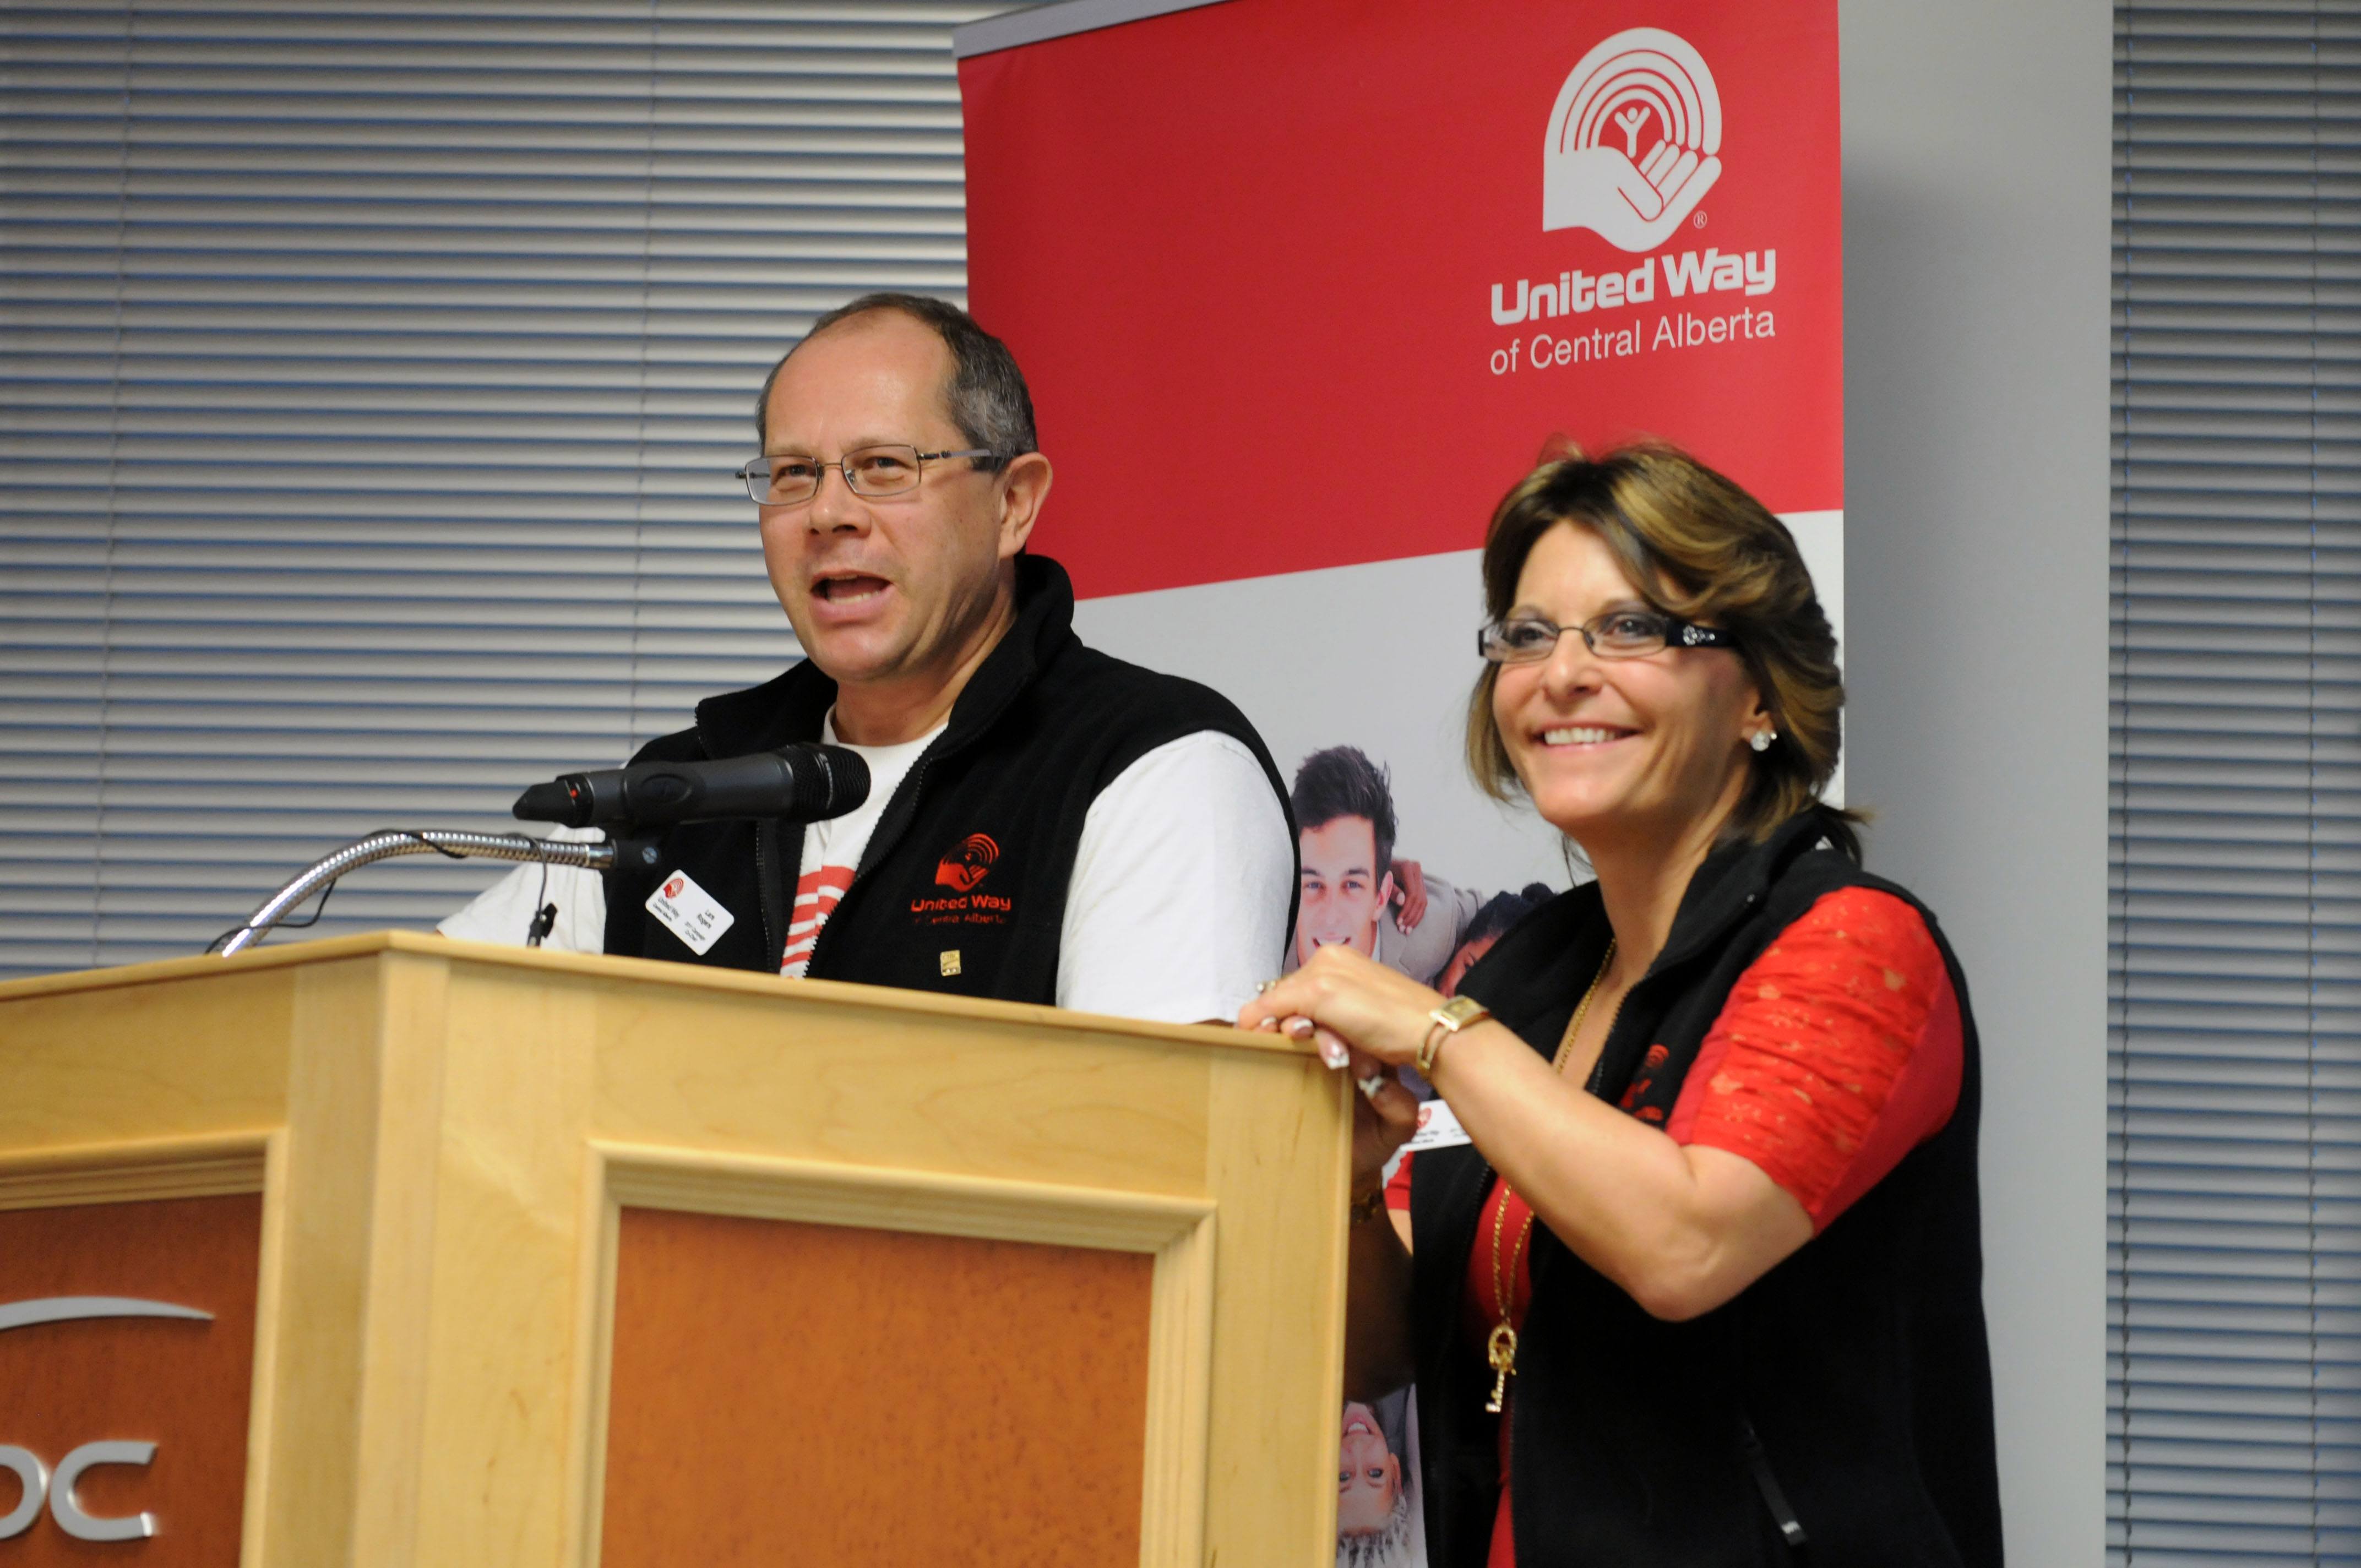 FINAL NUMBER- Lars Rogers and Sherri Smith with United Way announced the total amount of $1